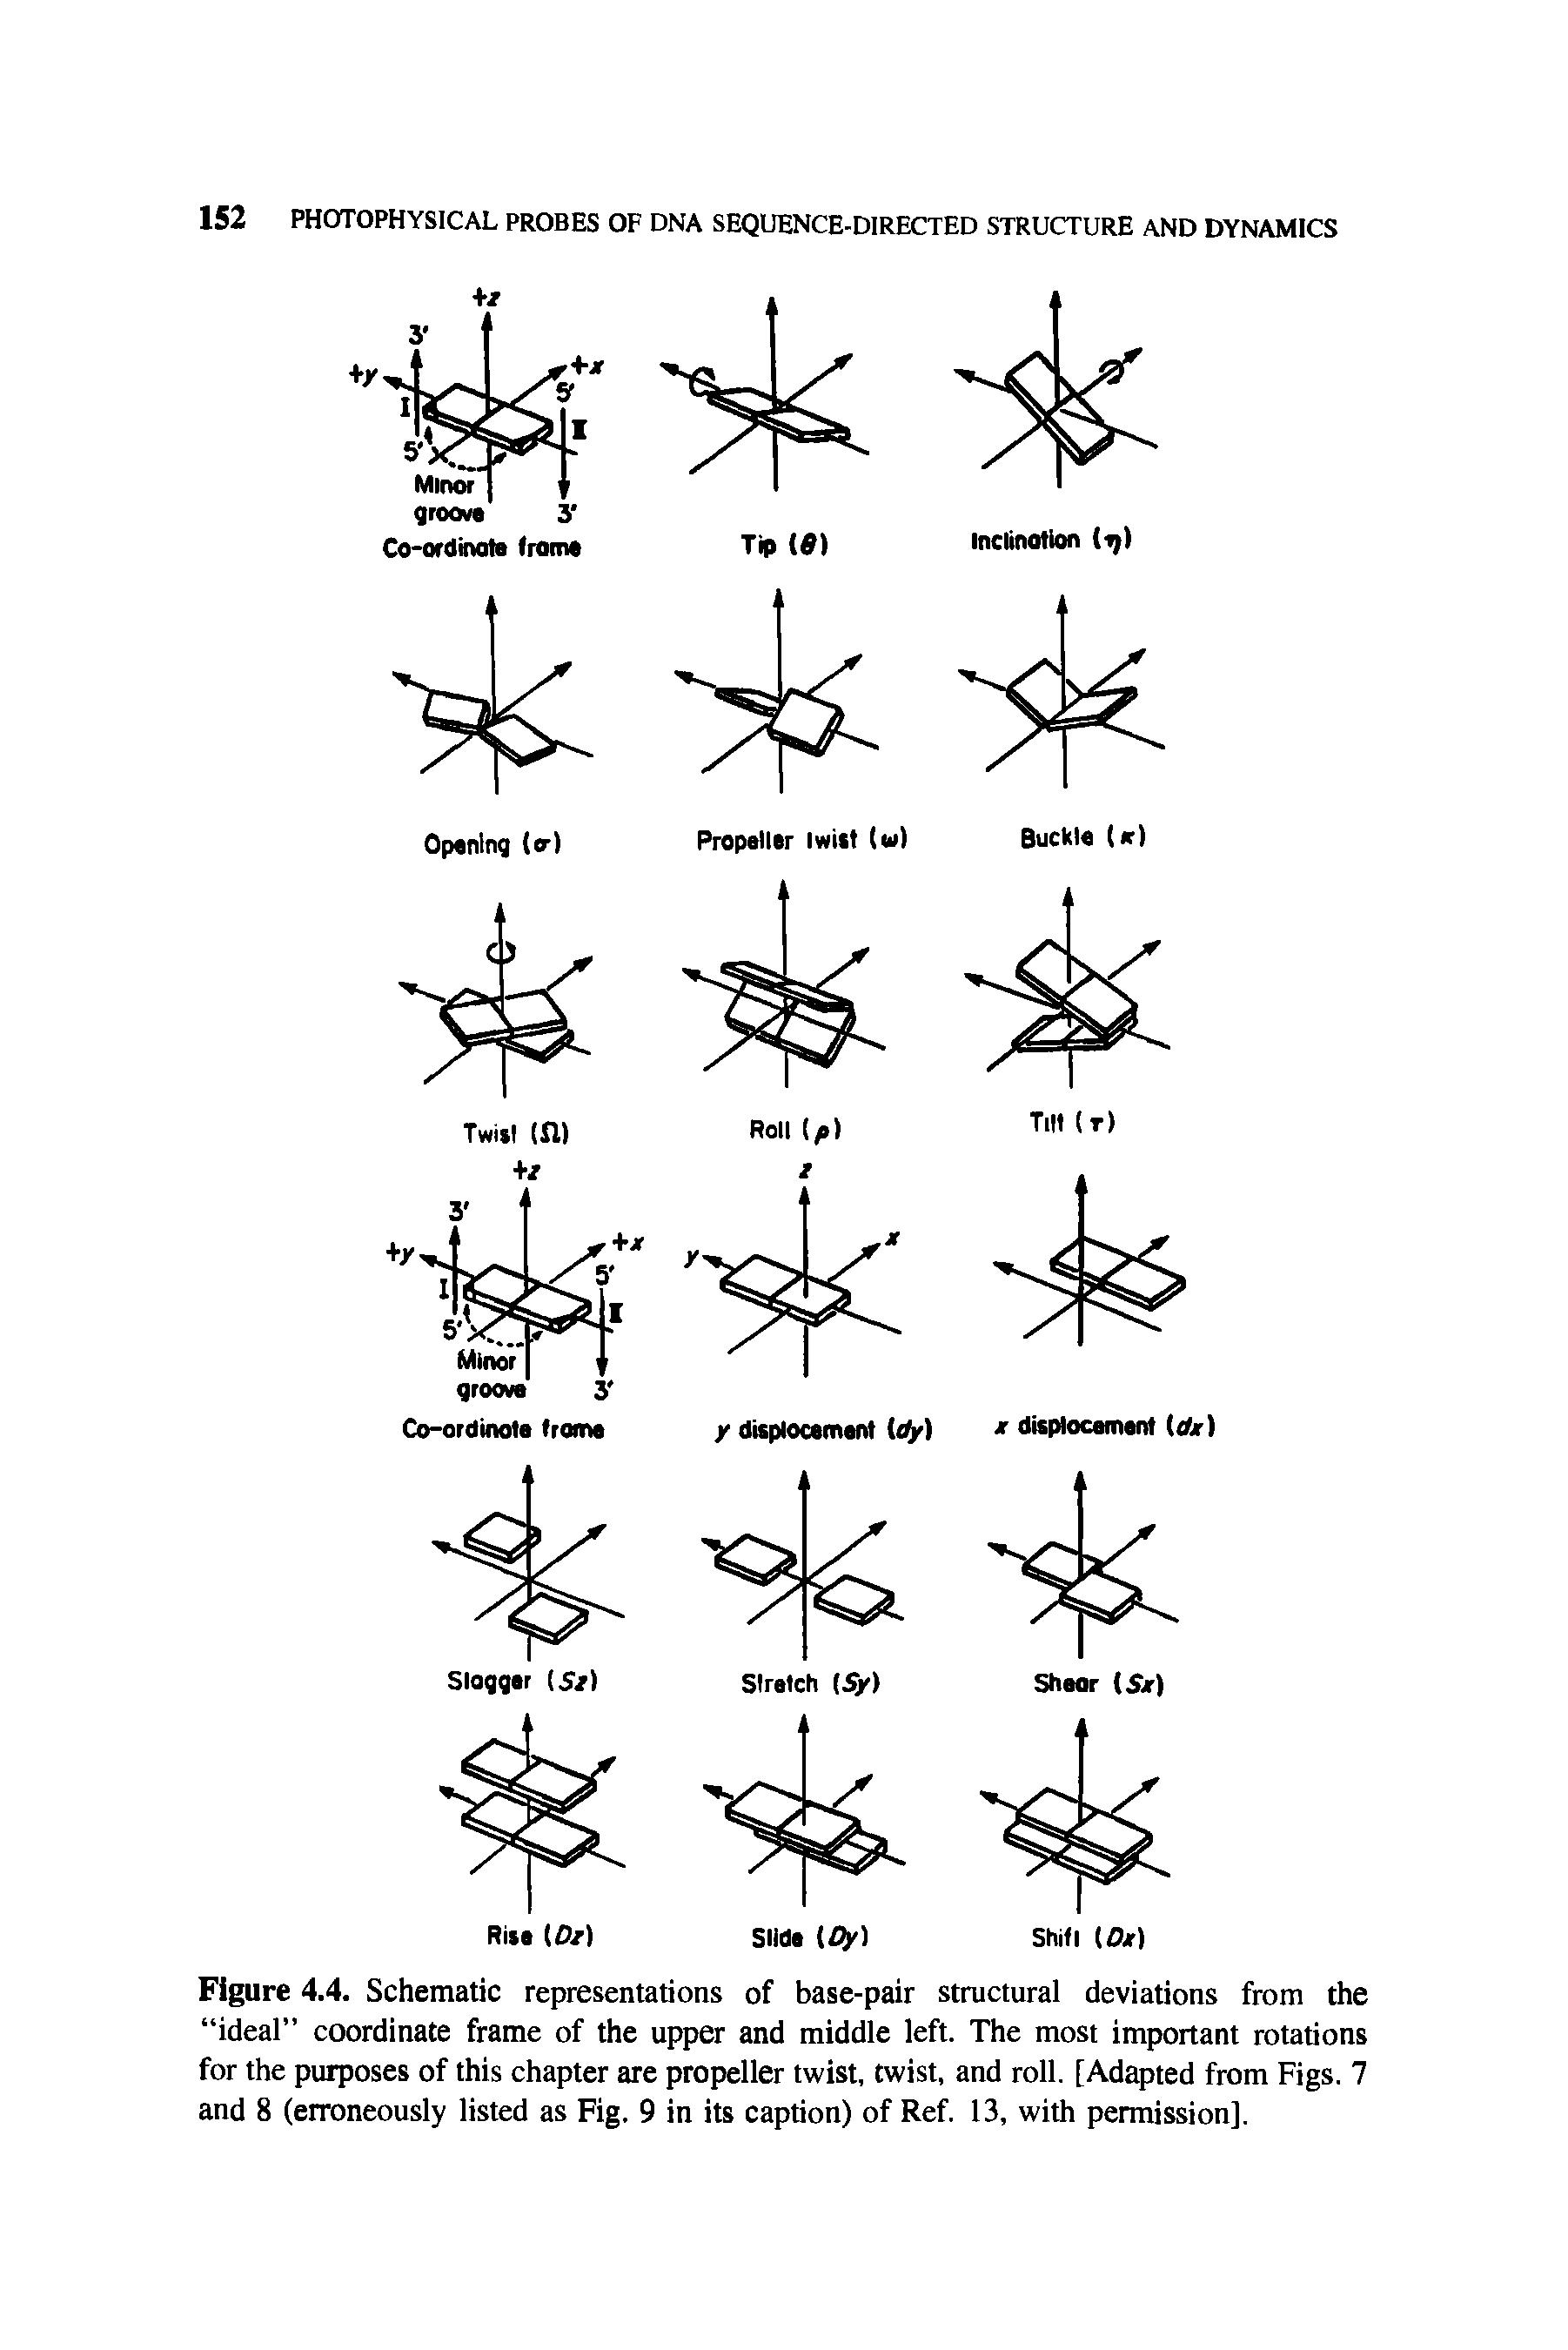 Figure 4.4. Schematic representations of base-pair structural deviations from the ideal coordinate frame of the upper and middle left. The most important rotations for the purposes of this chapter are propeller twist, twist, and roll. [Adapted from Figs. 7 and 8 (erroneously listed as Fig. 9 in its caption) of Ref. 13, with permission].